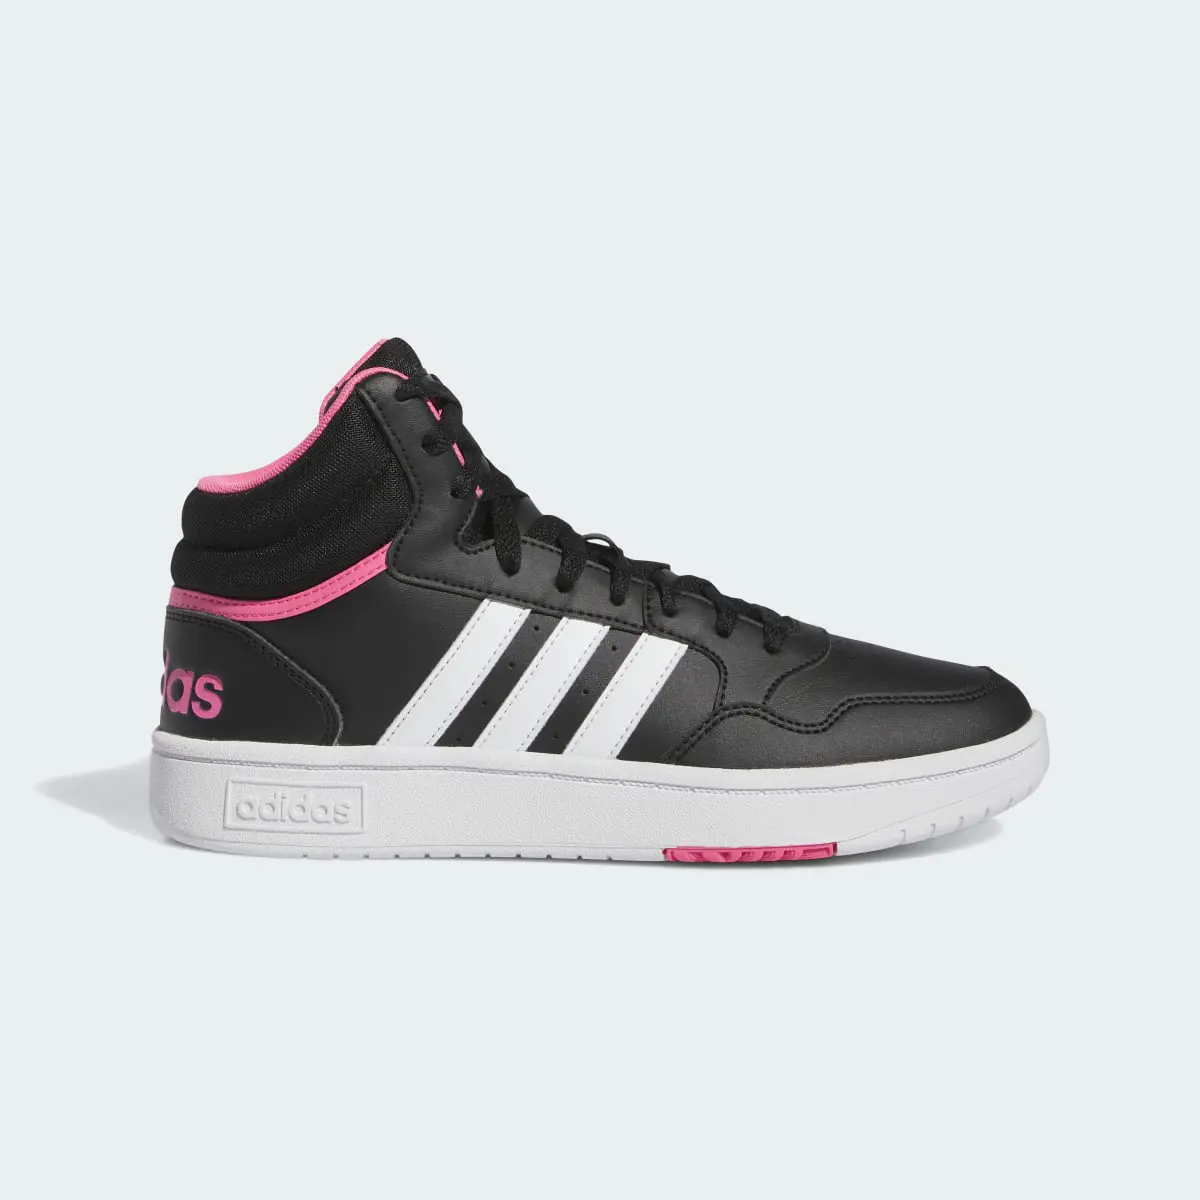 Adidas Hoops 3.0 Mid Shoes. 2